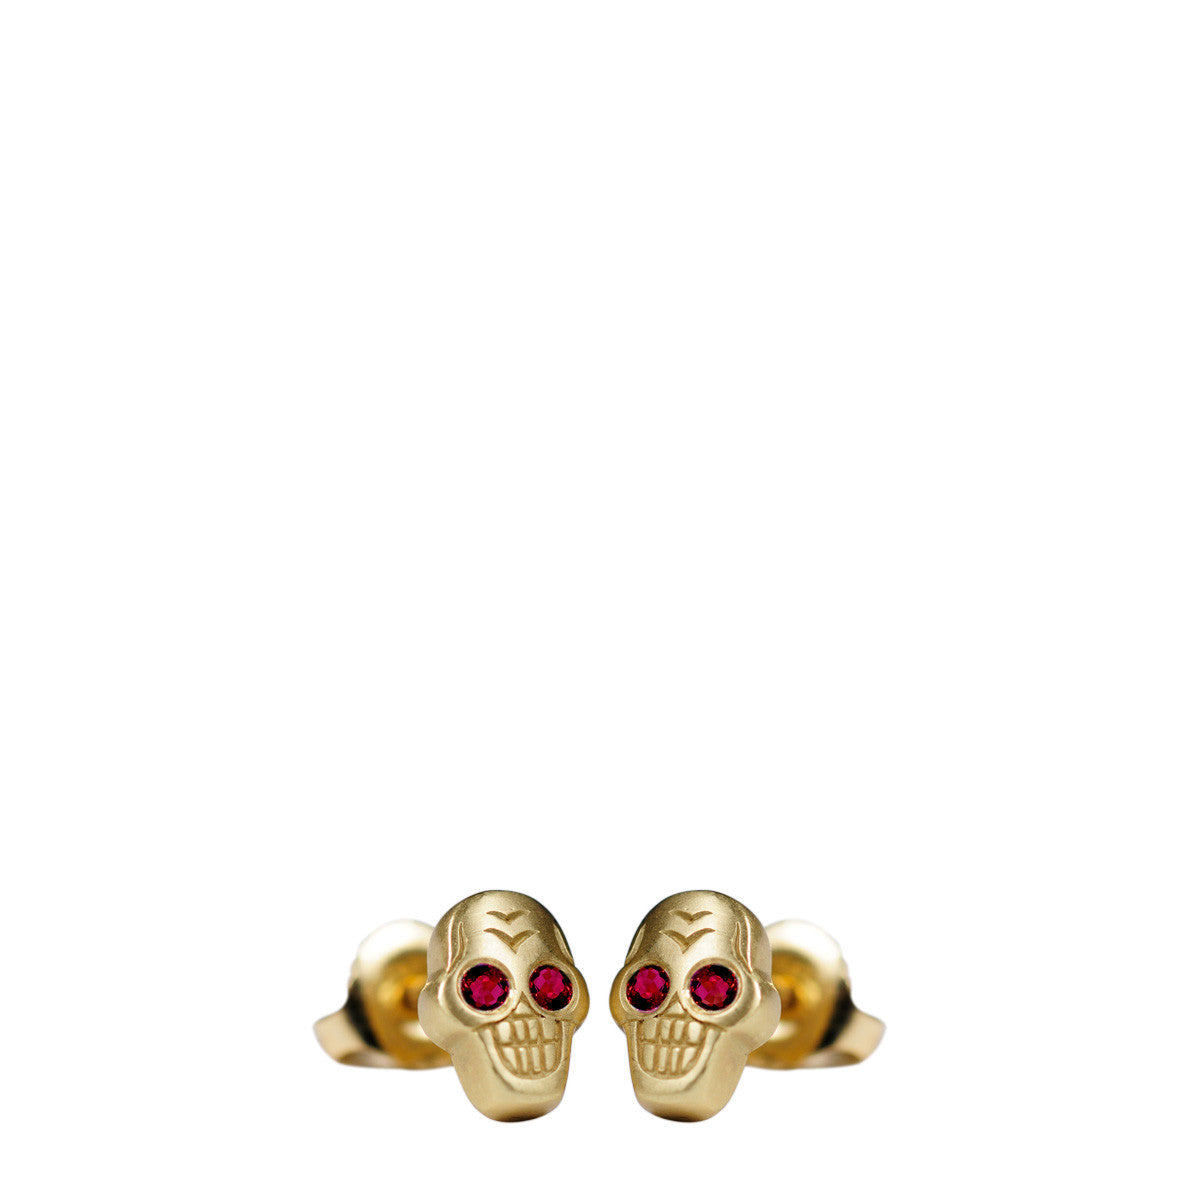 18K Gold Tiny Skull Stud Earrings with Rubies